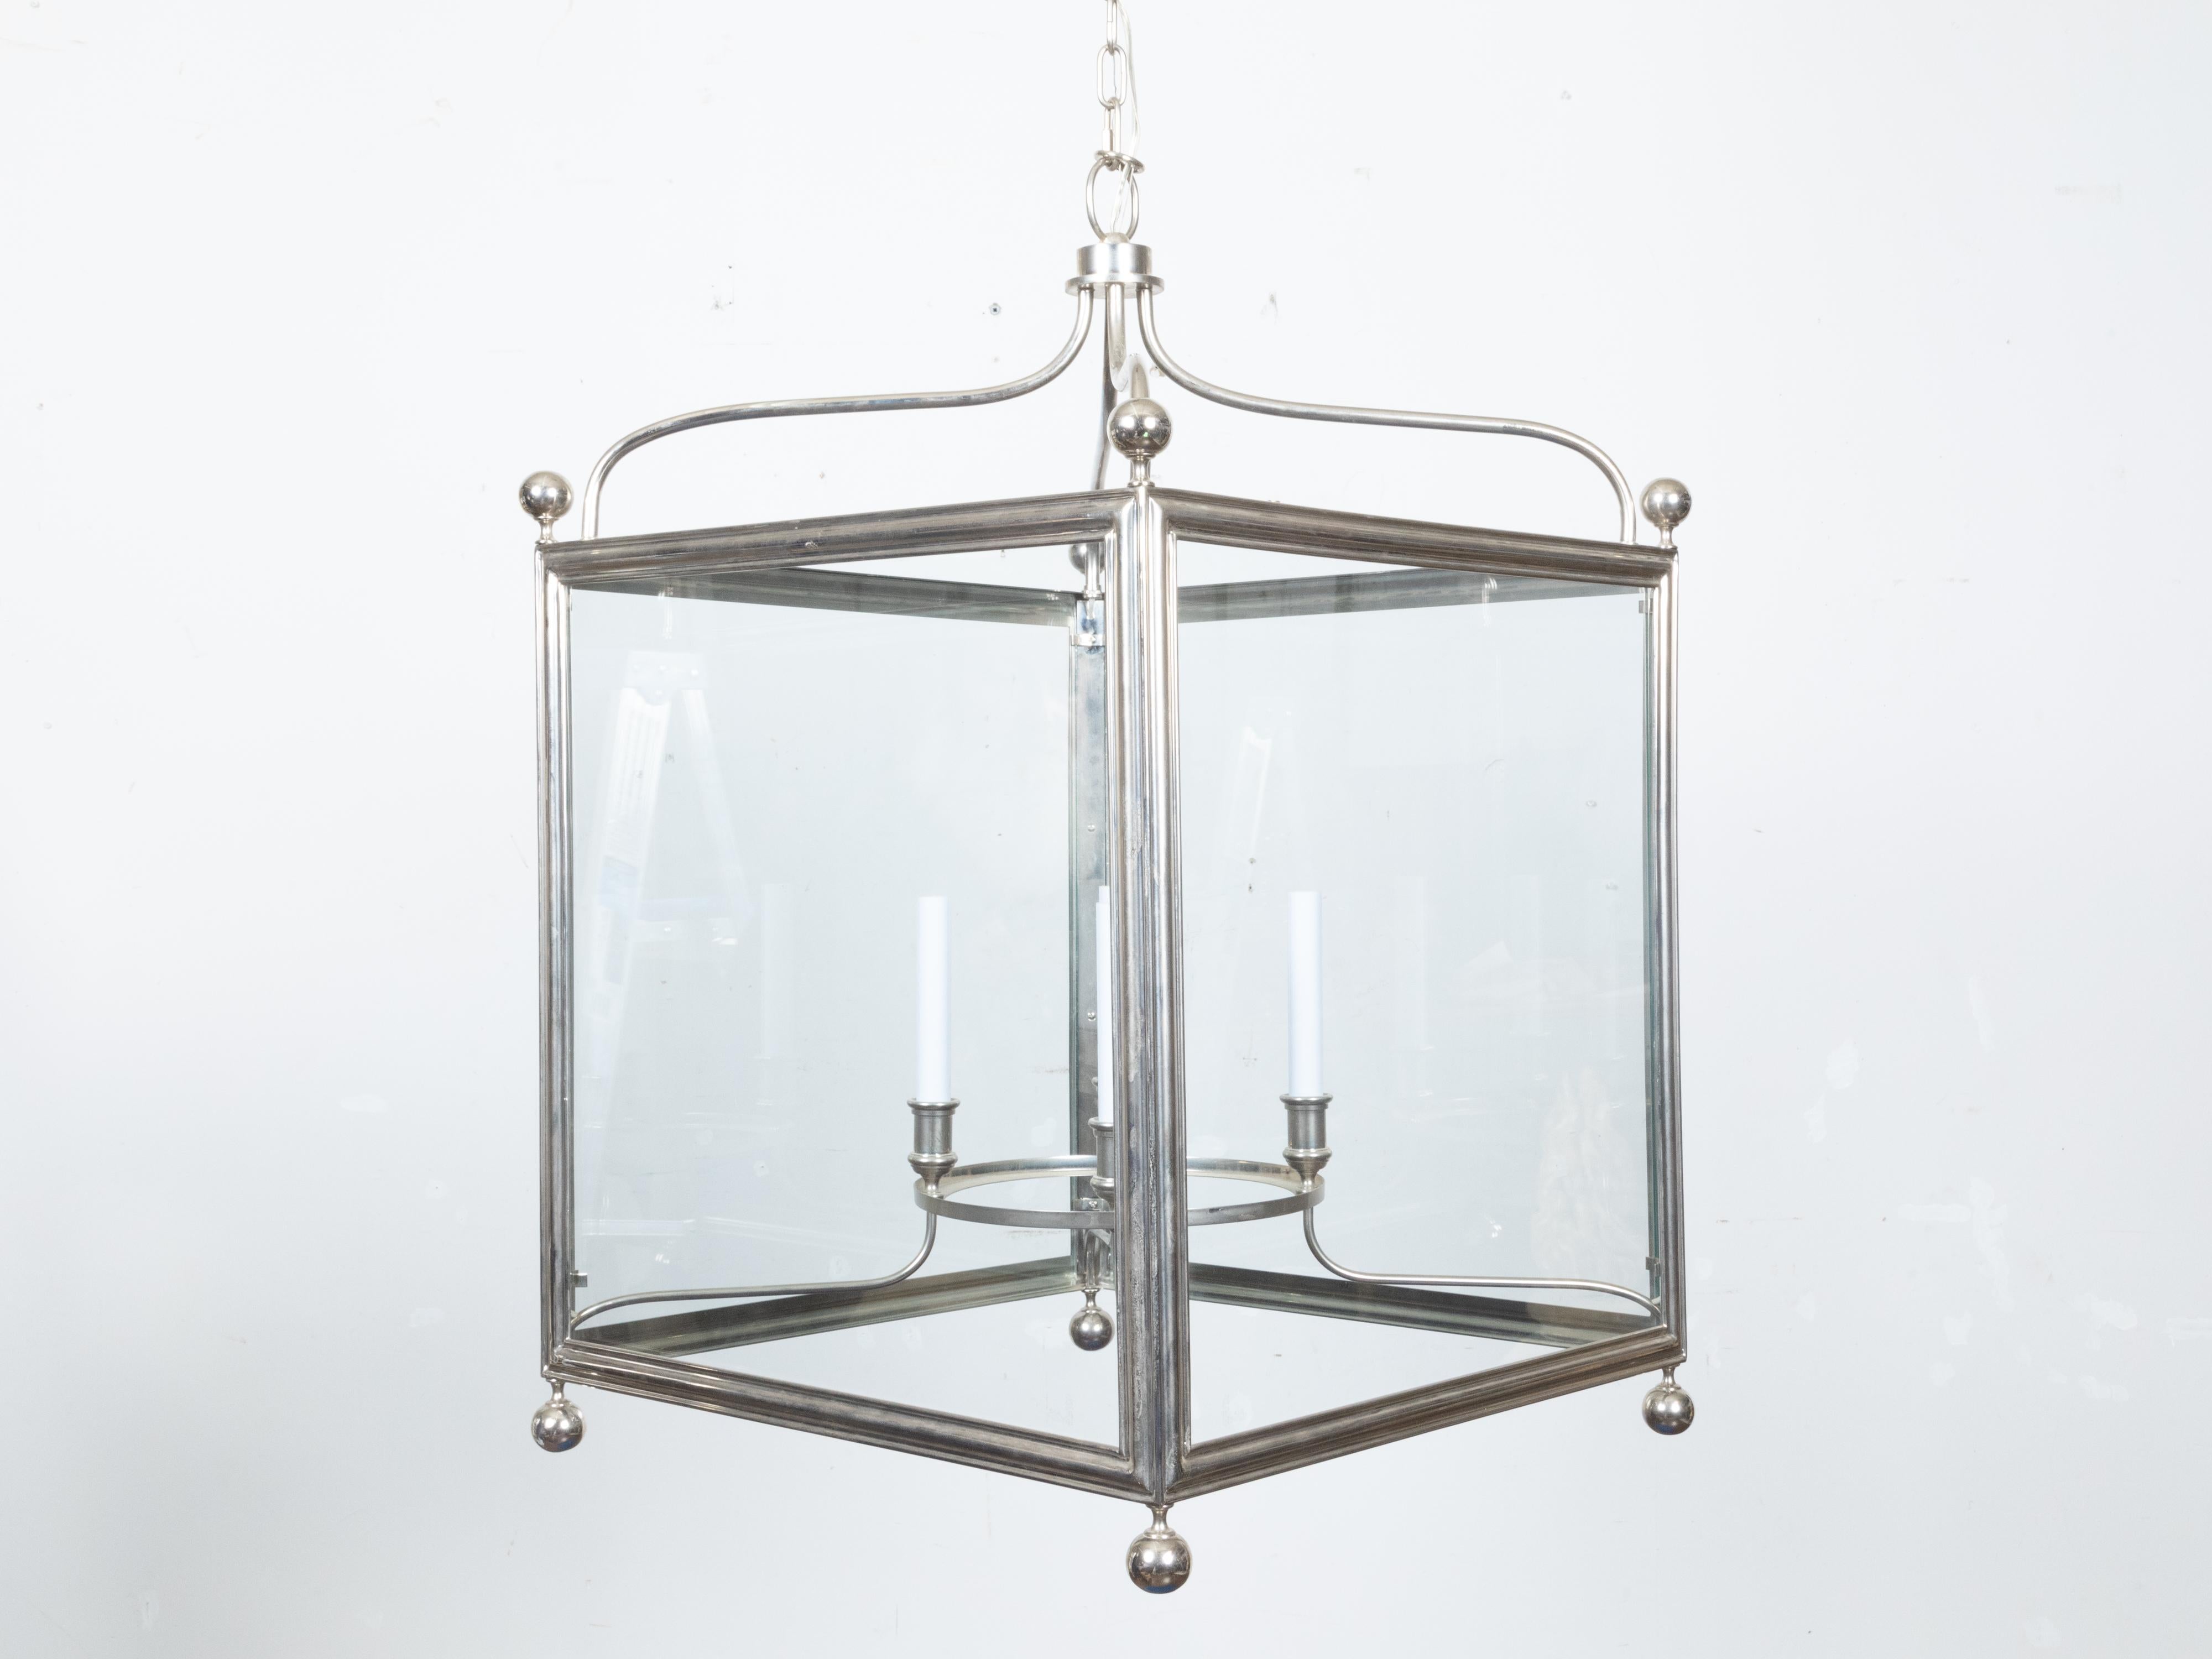 English Midcentury Four-Light Lantern with Silver Color and Petite Spheres For Sale 3